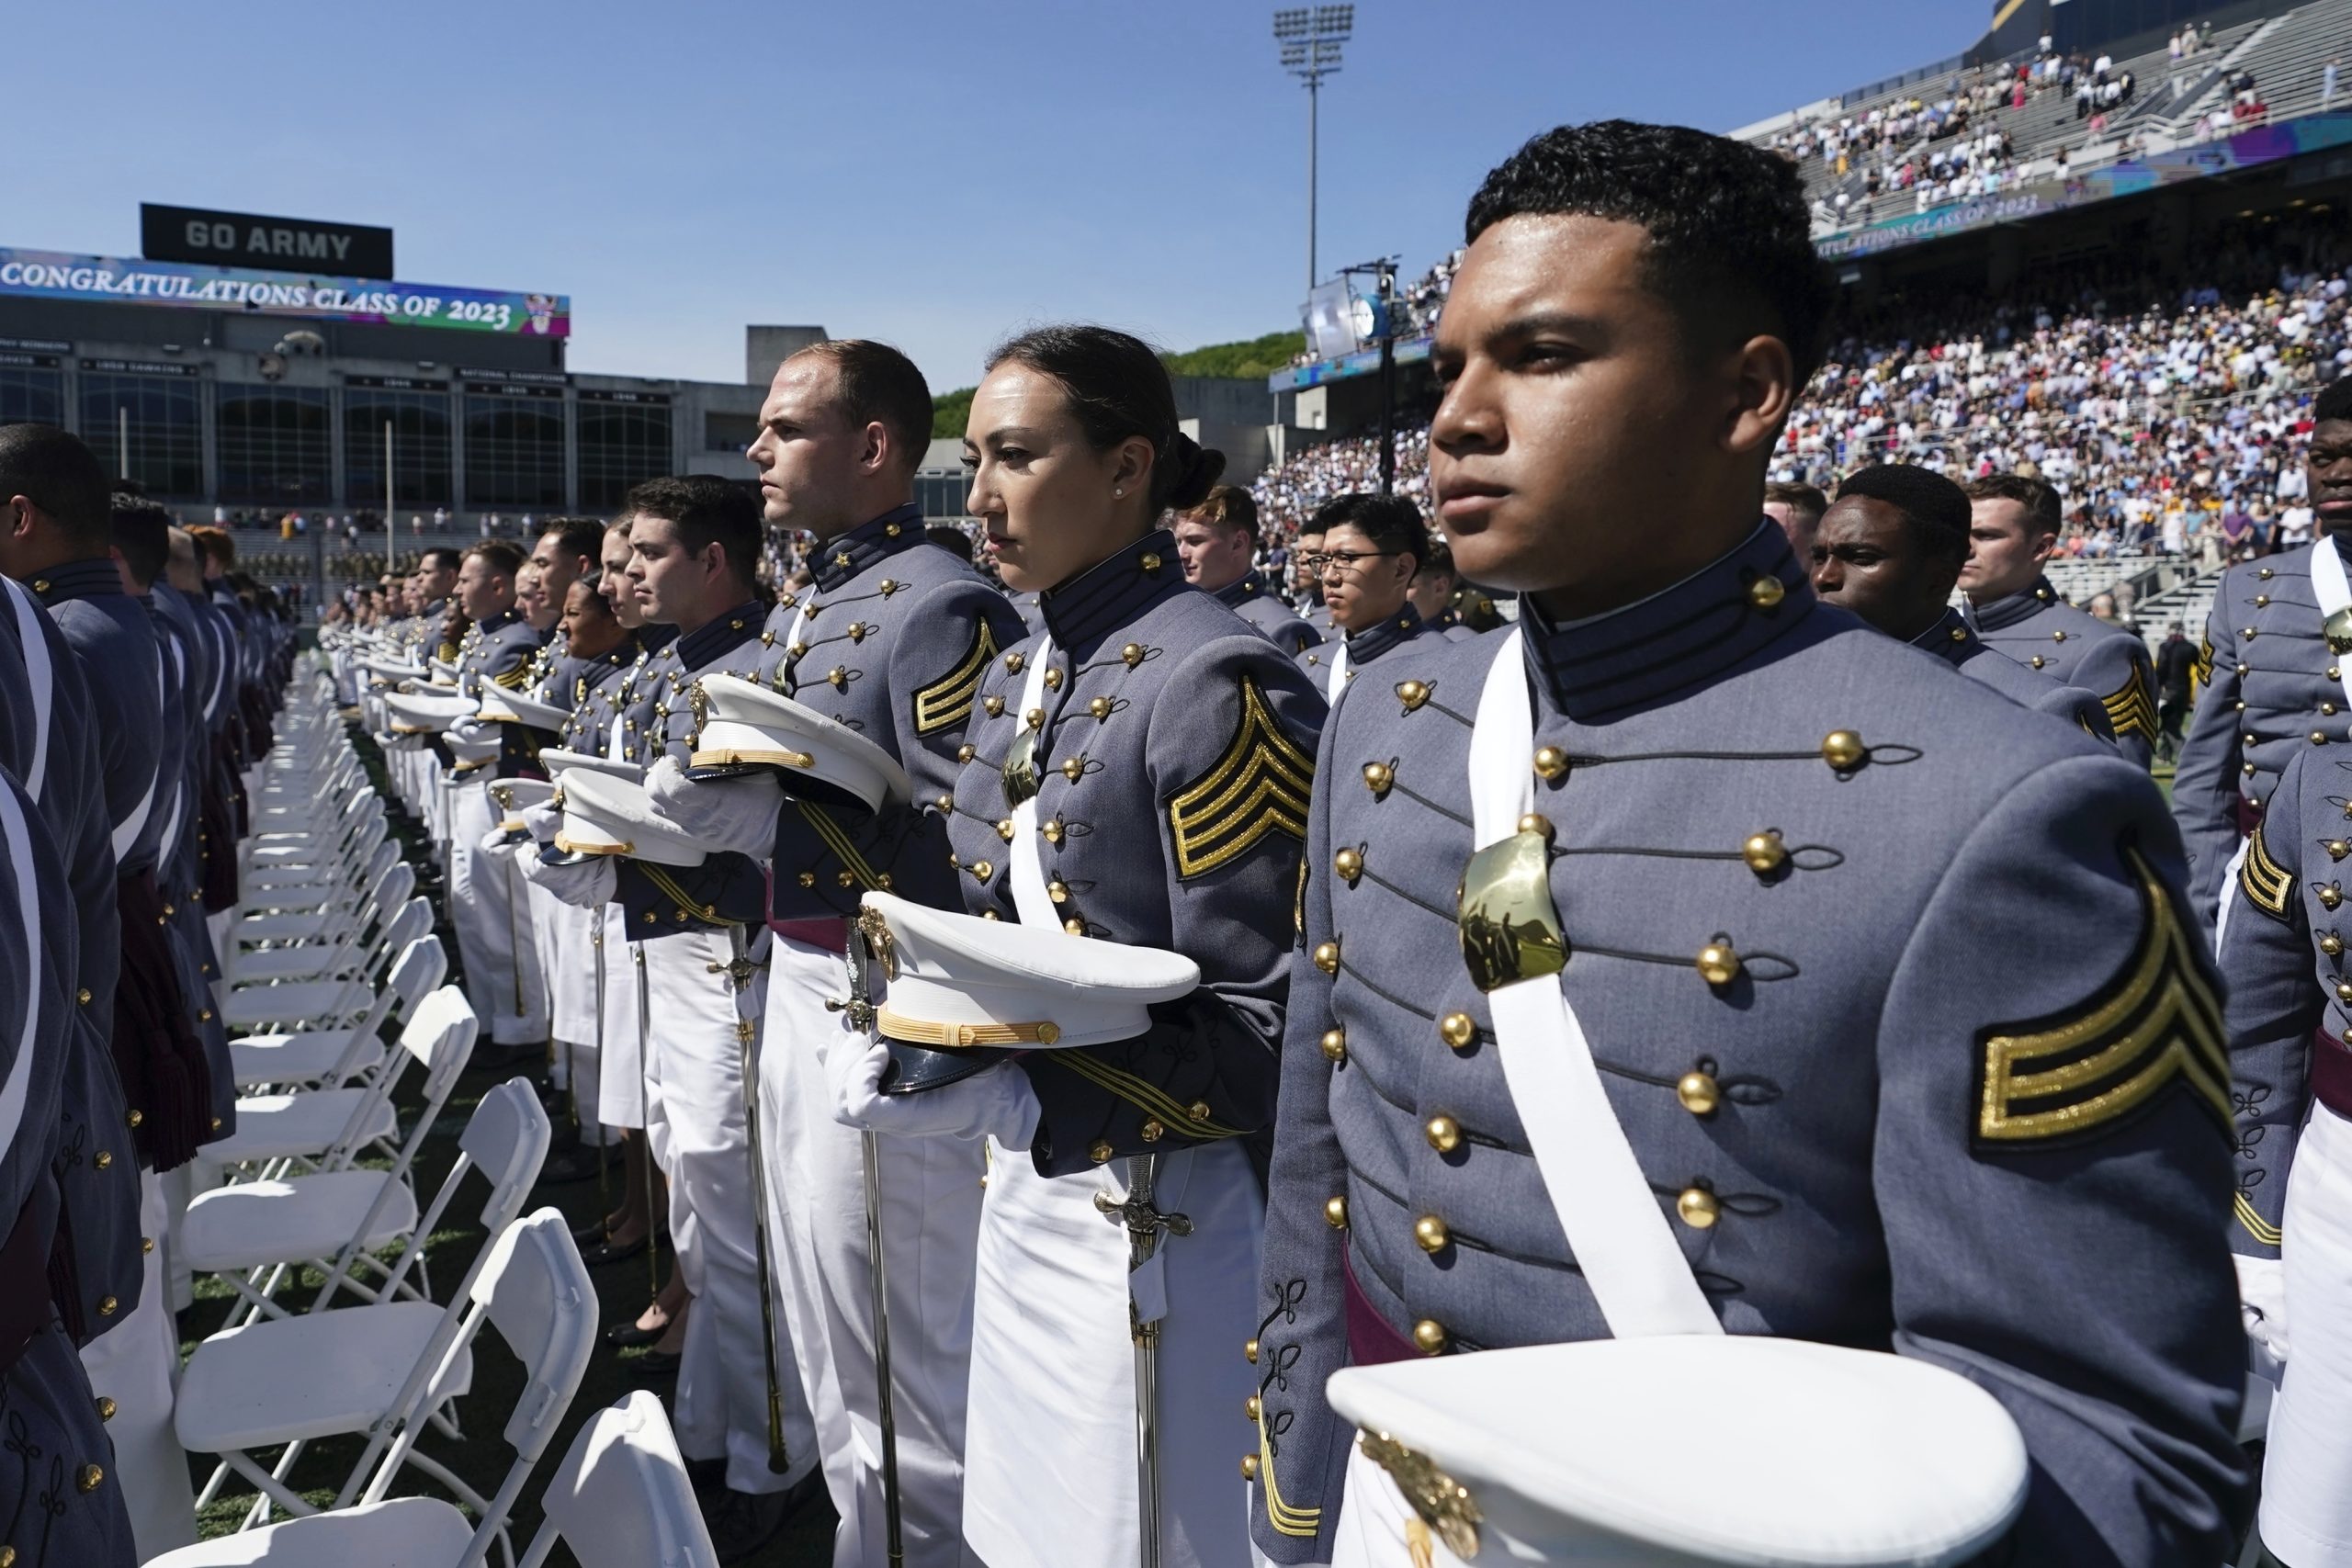 Supreme Court Allows Continuation of West Point's Race-Inclusive Admissions Policy Amid Ongoing Lawsuit